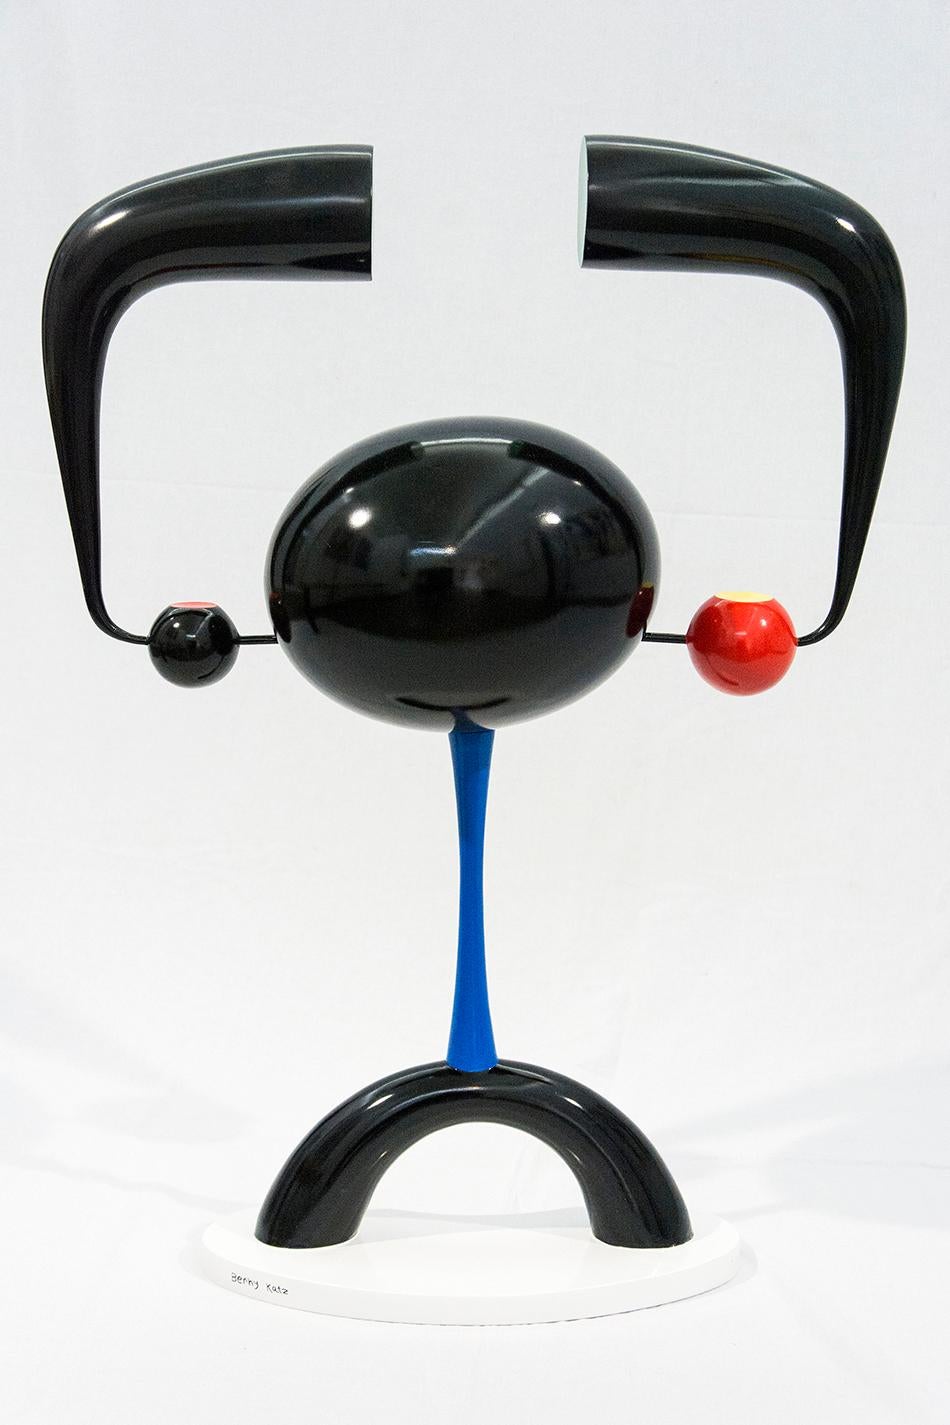 Arnold - playful body builder - black and white with red, yellow and green - Gray Abstract Sculpture by Benny Katz